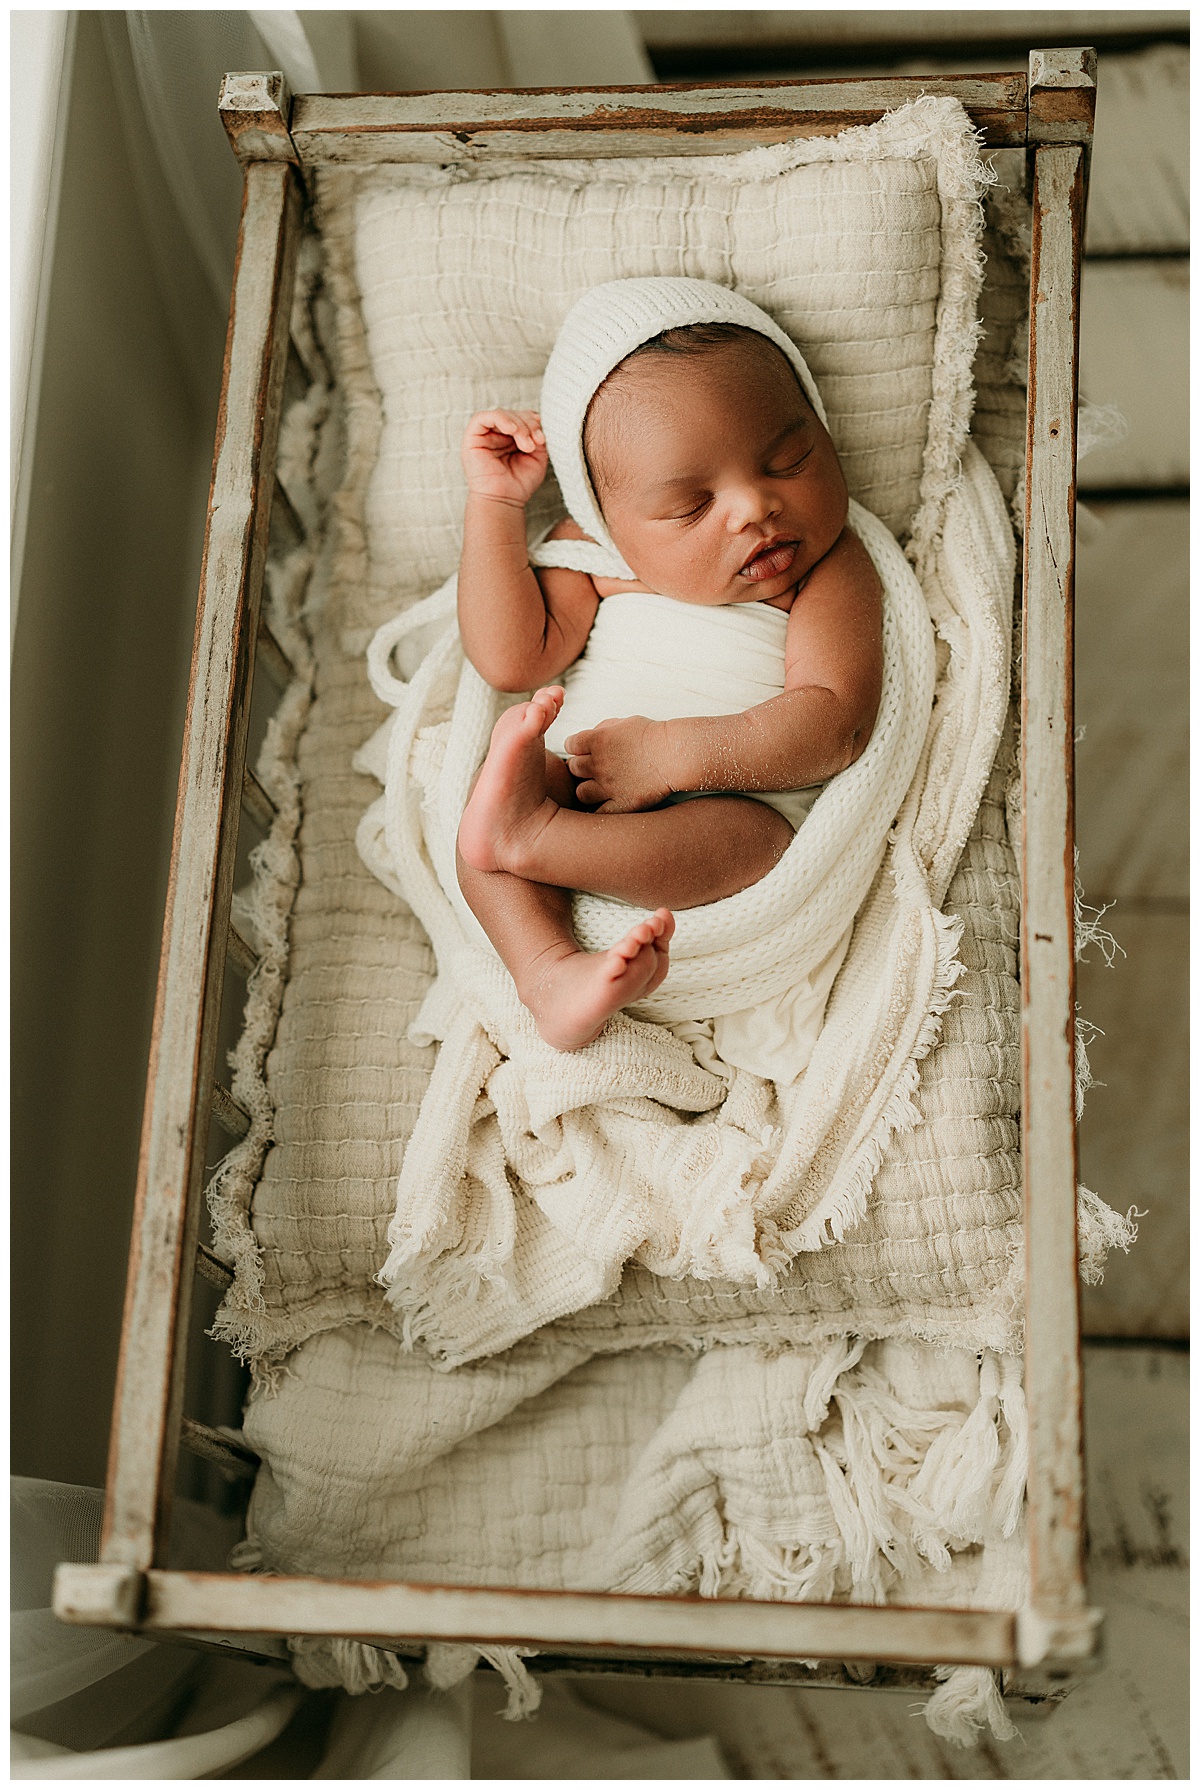 Newborn baby boy in cradle for Norma Fayak Photography